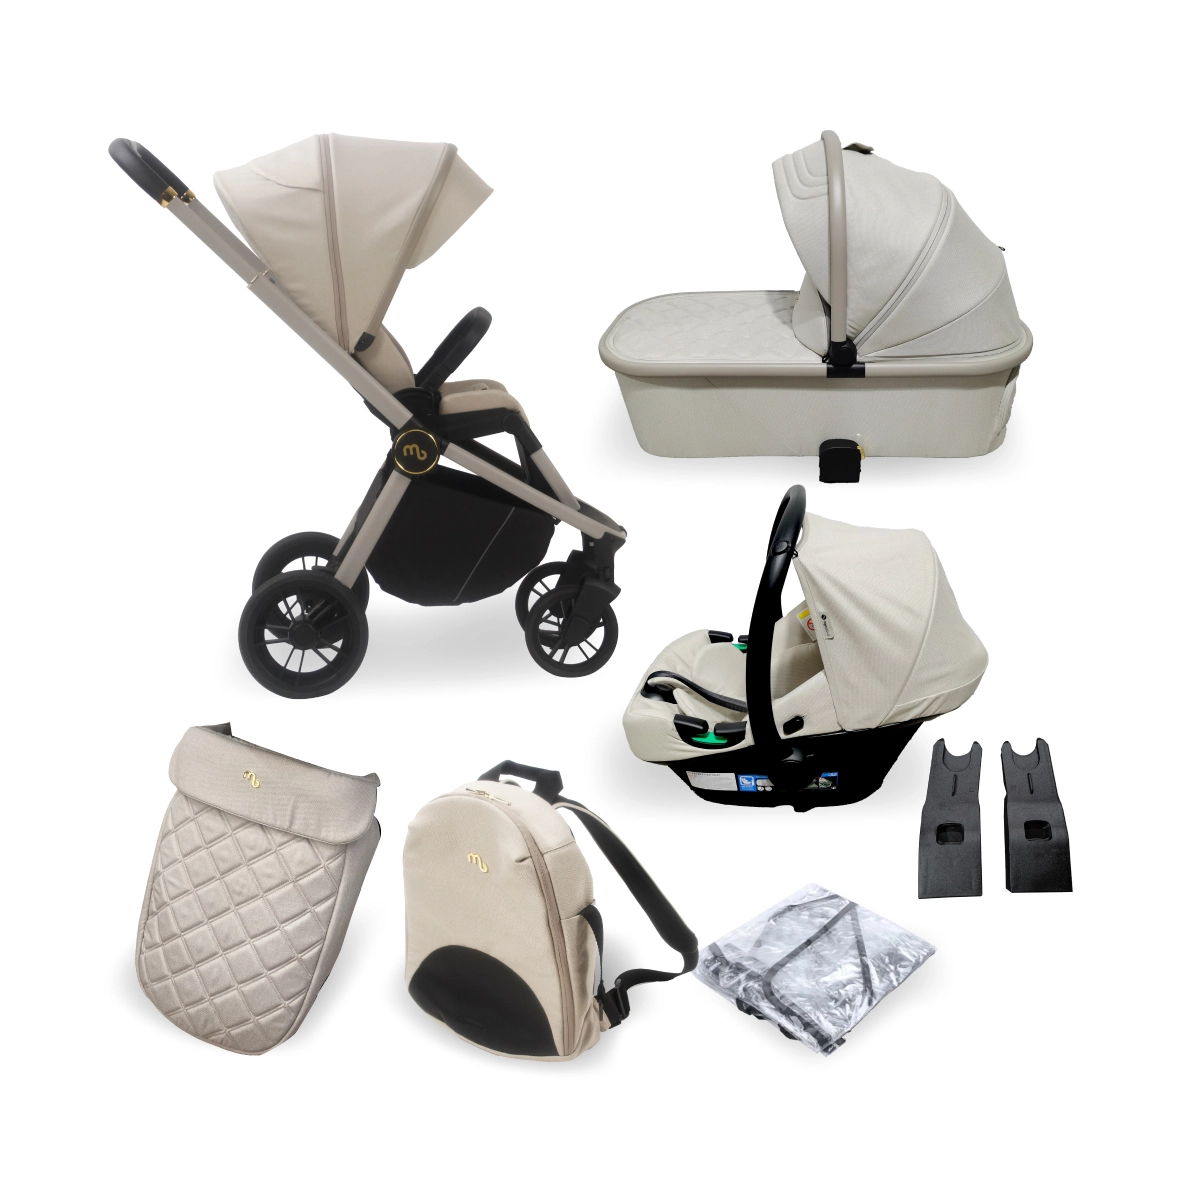 My Babiie MB450i Dani Dyer 3 in 1 Travel System